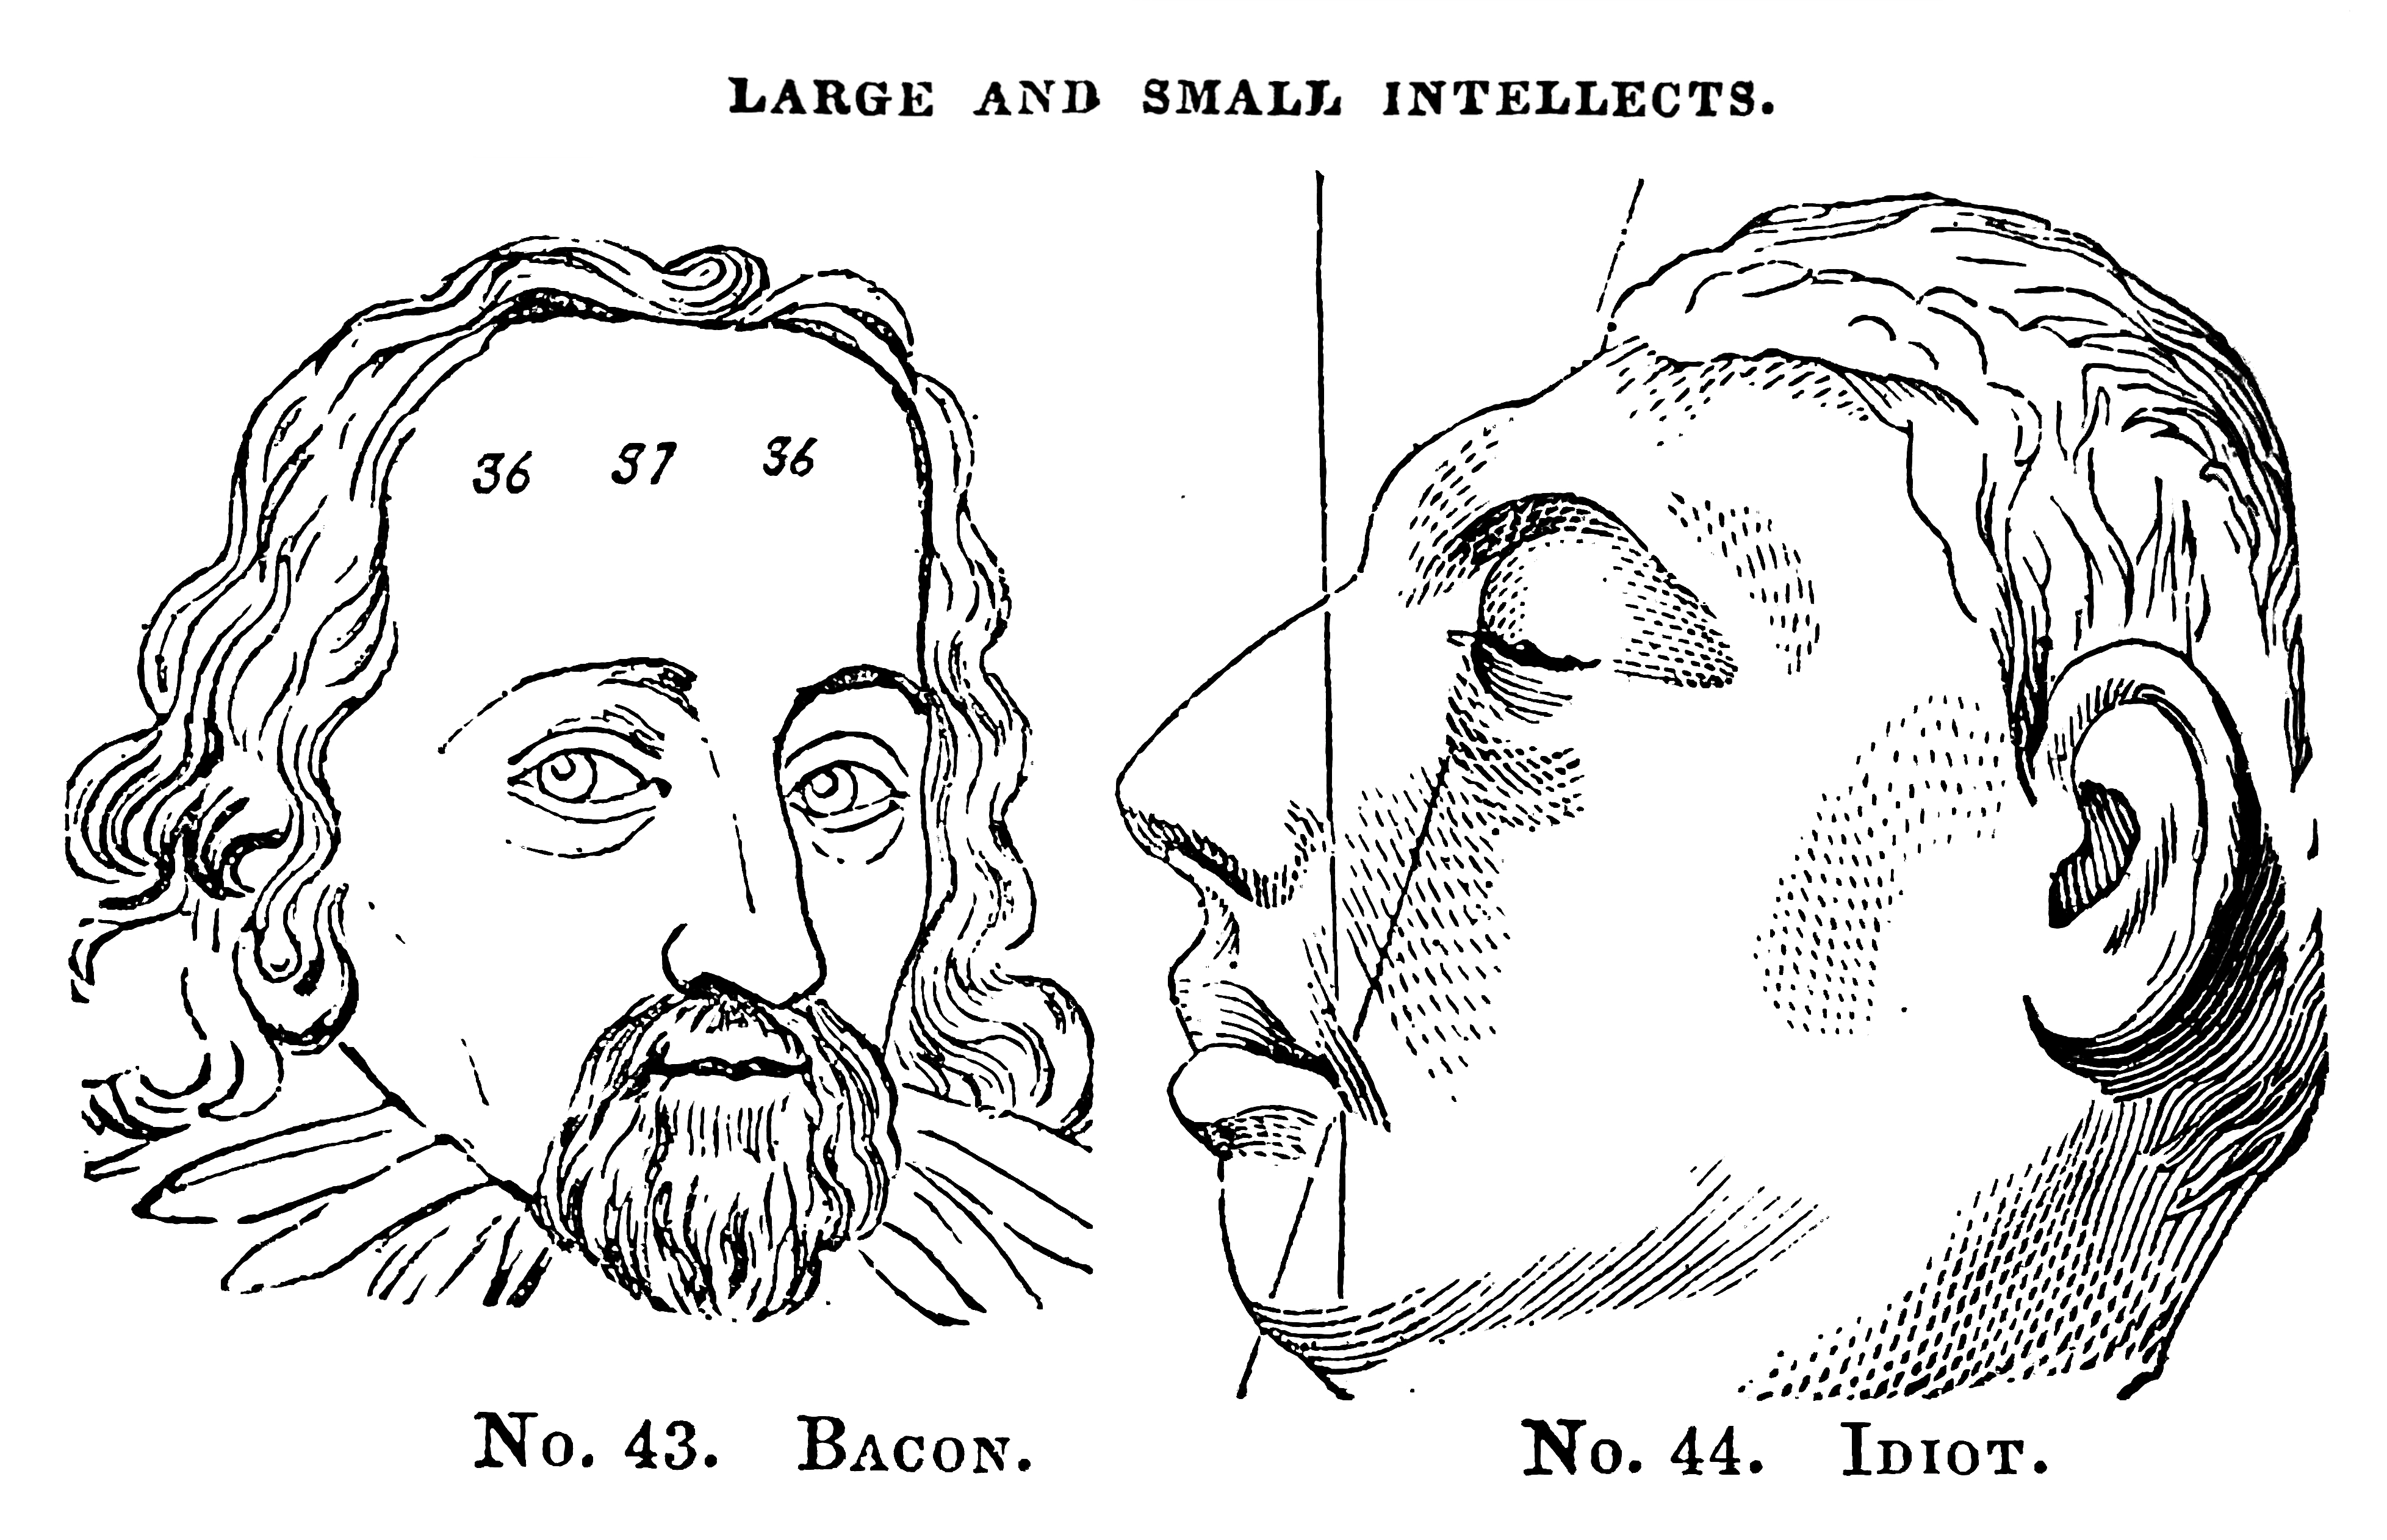 A drawing of two heads titled “large and small intellects”. Sir Francis Bacon is shown with his large forehead and an “idiot” is shown with a smaller forehead.